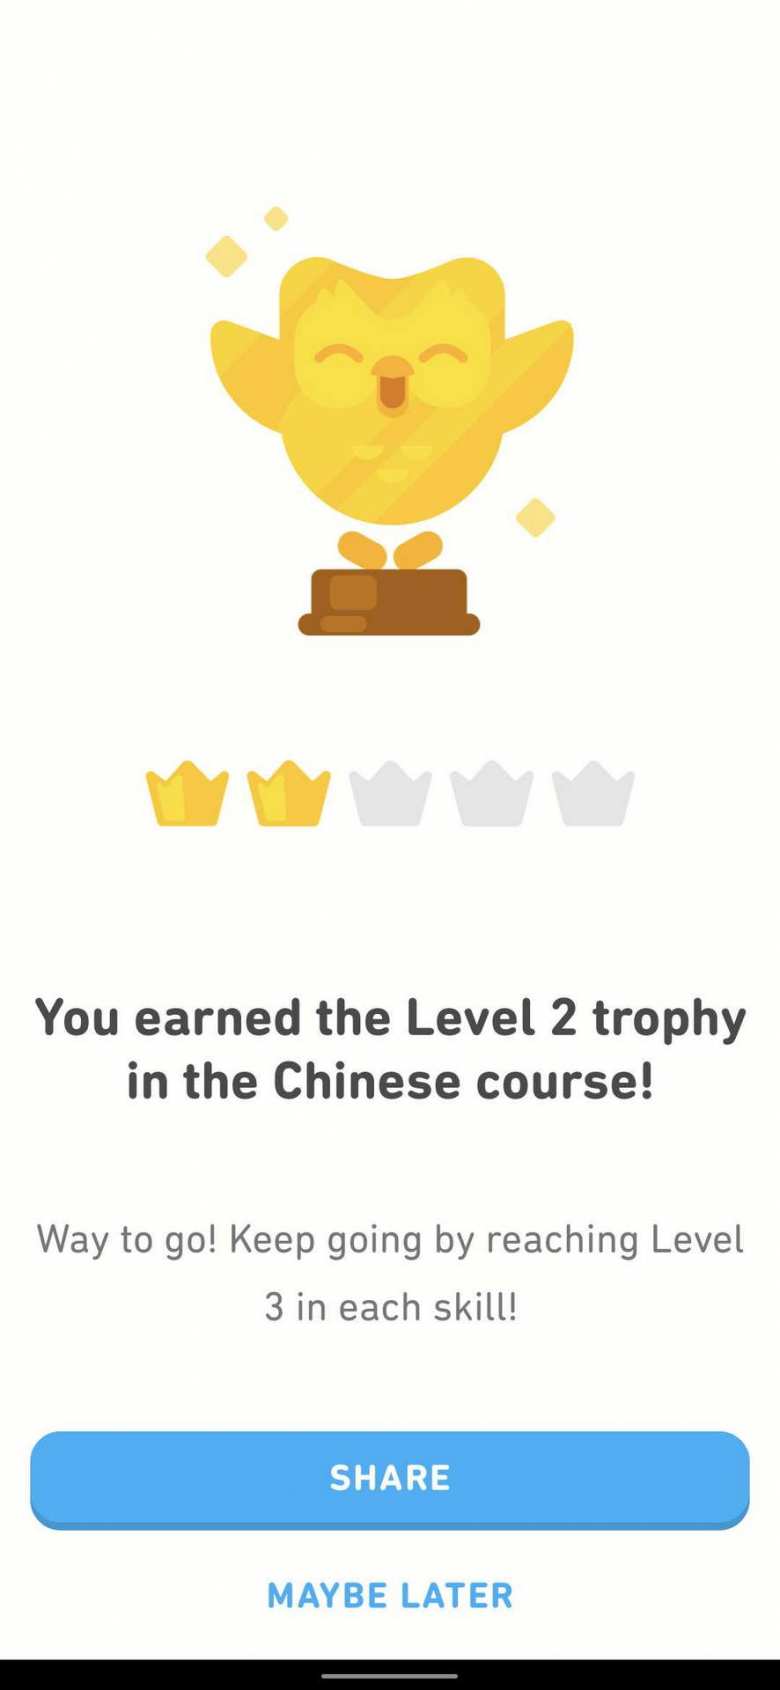 Duolingo trophy, two crowns, You earned the Level 2 trophy in the Chinese course